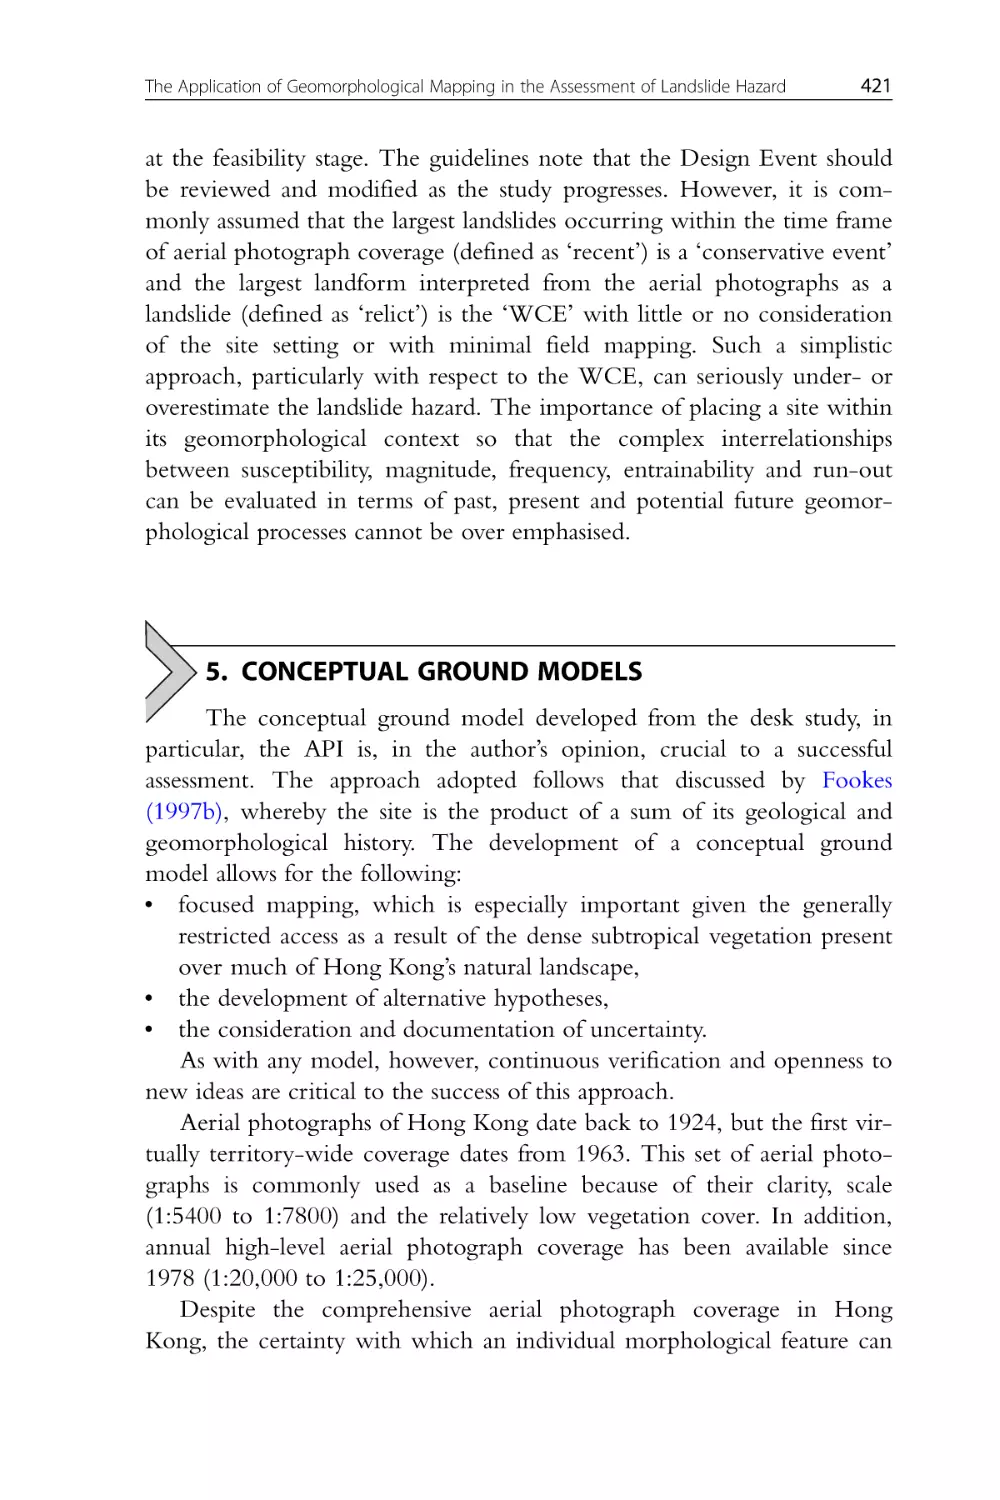 5. Conceptual Ground Models